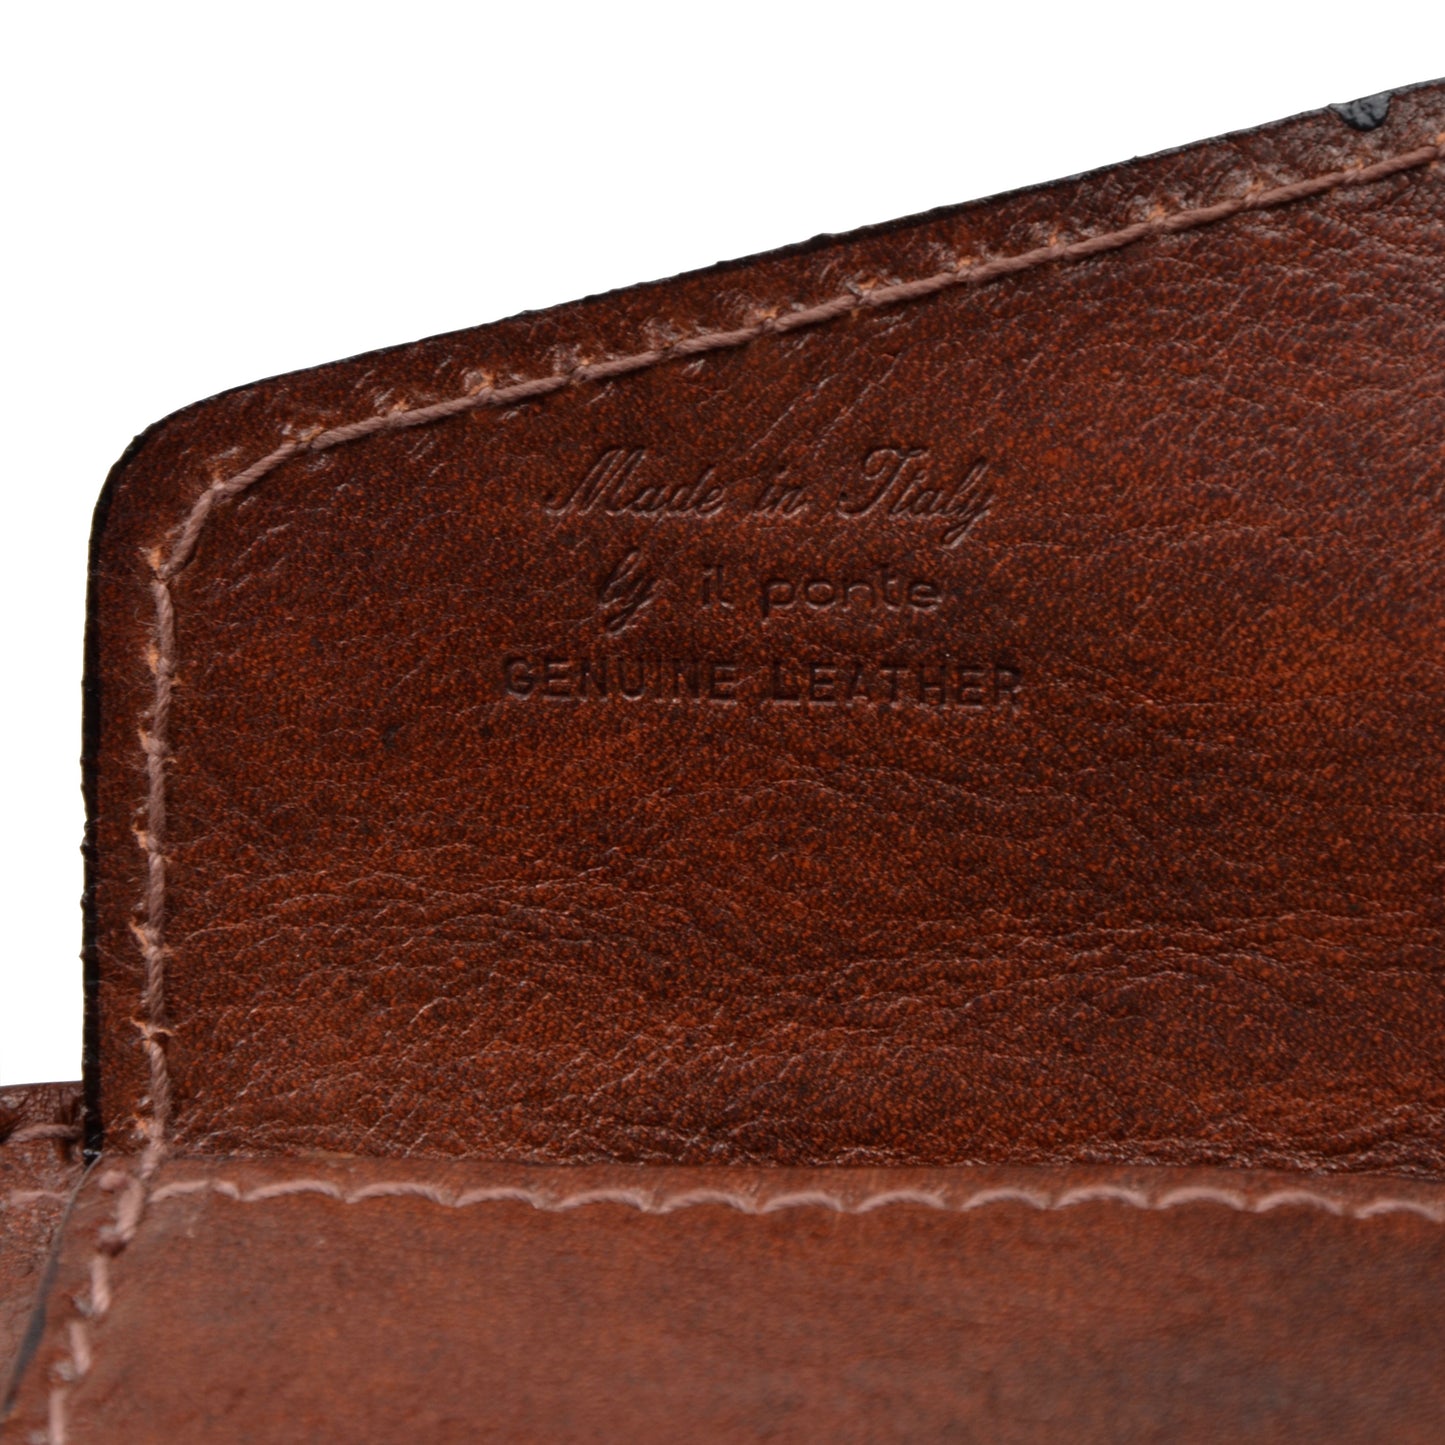 The Bridge Leather Travel Pouch - Brown